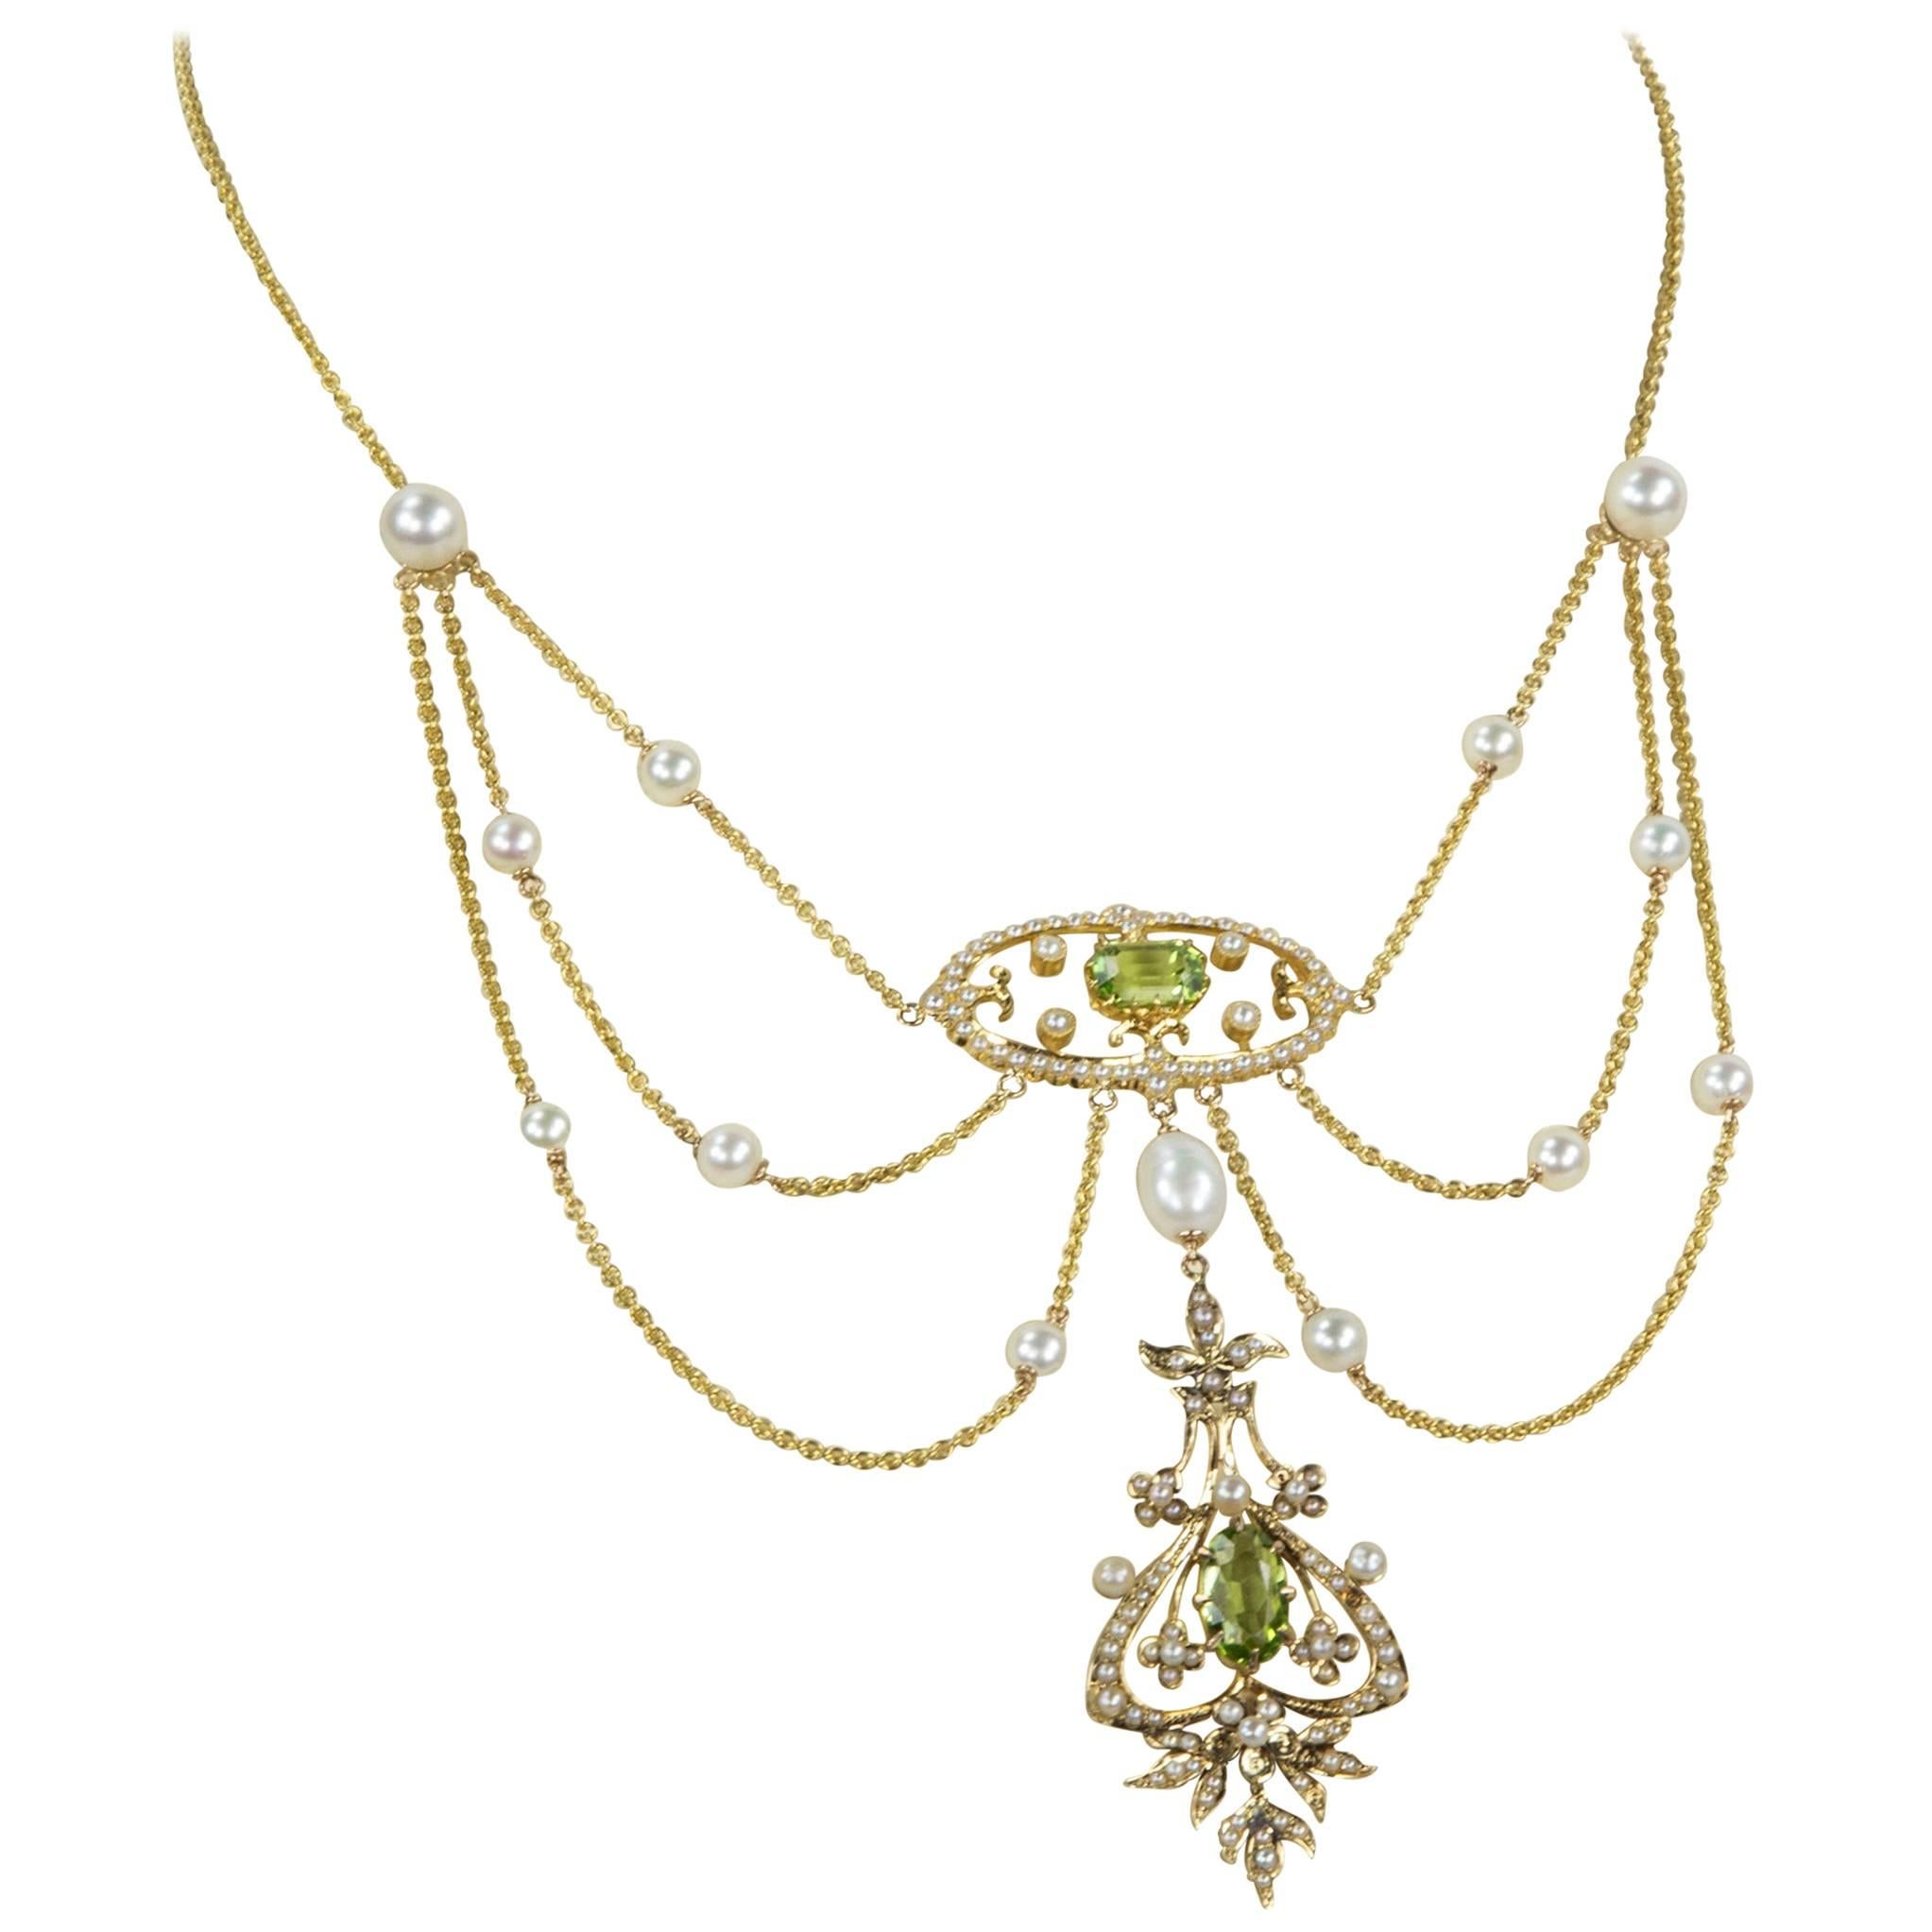 Antique Edwardian Peridot and Pearl Gold Swag Necklace Estate Fine Jewelry